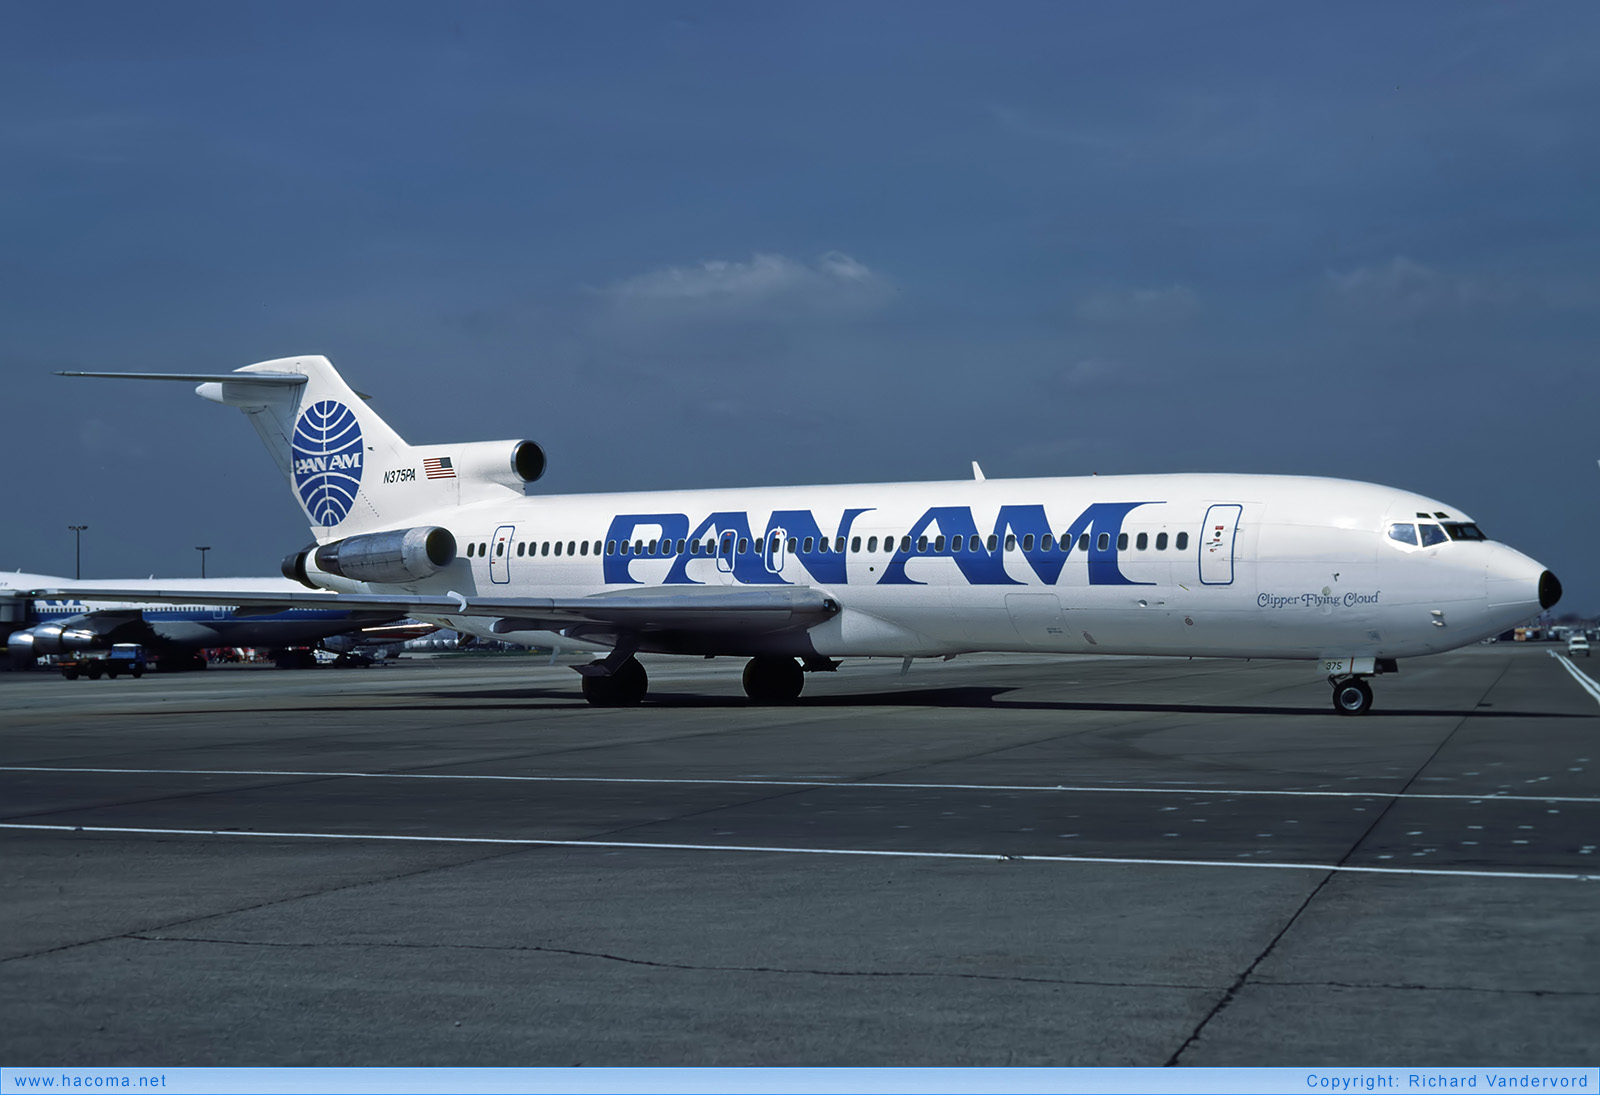 Photo of N375PA - Pan Am Clipper Flying Cloud - London Heathrow Airport - May 1985